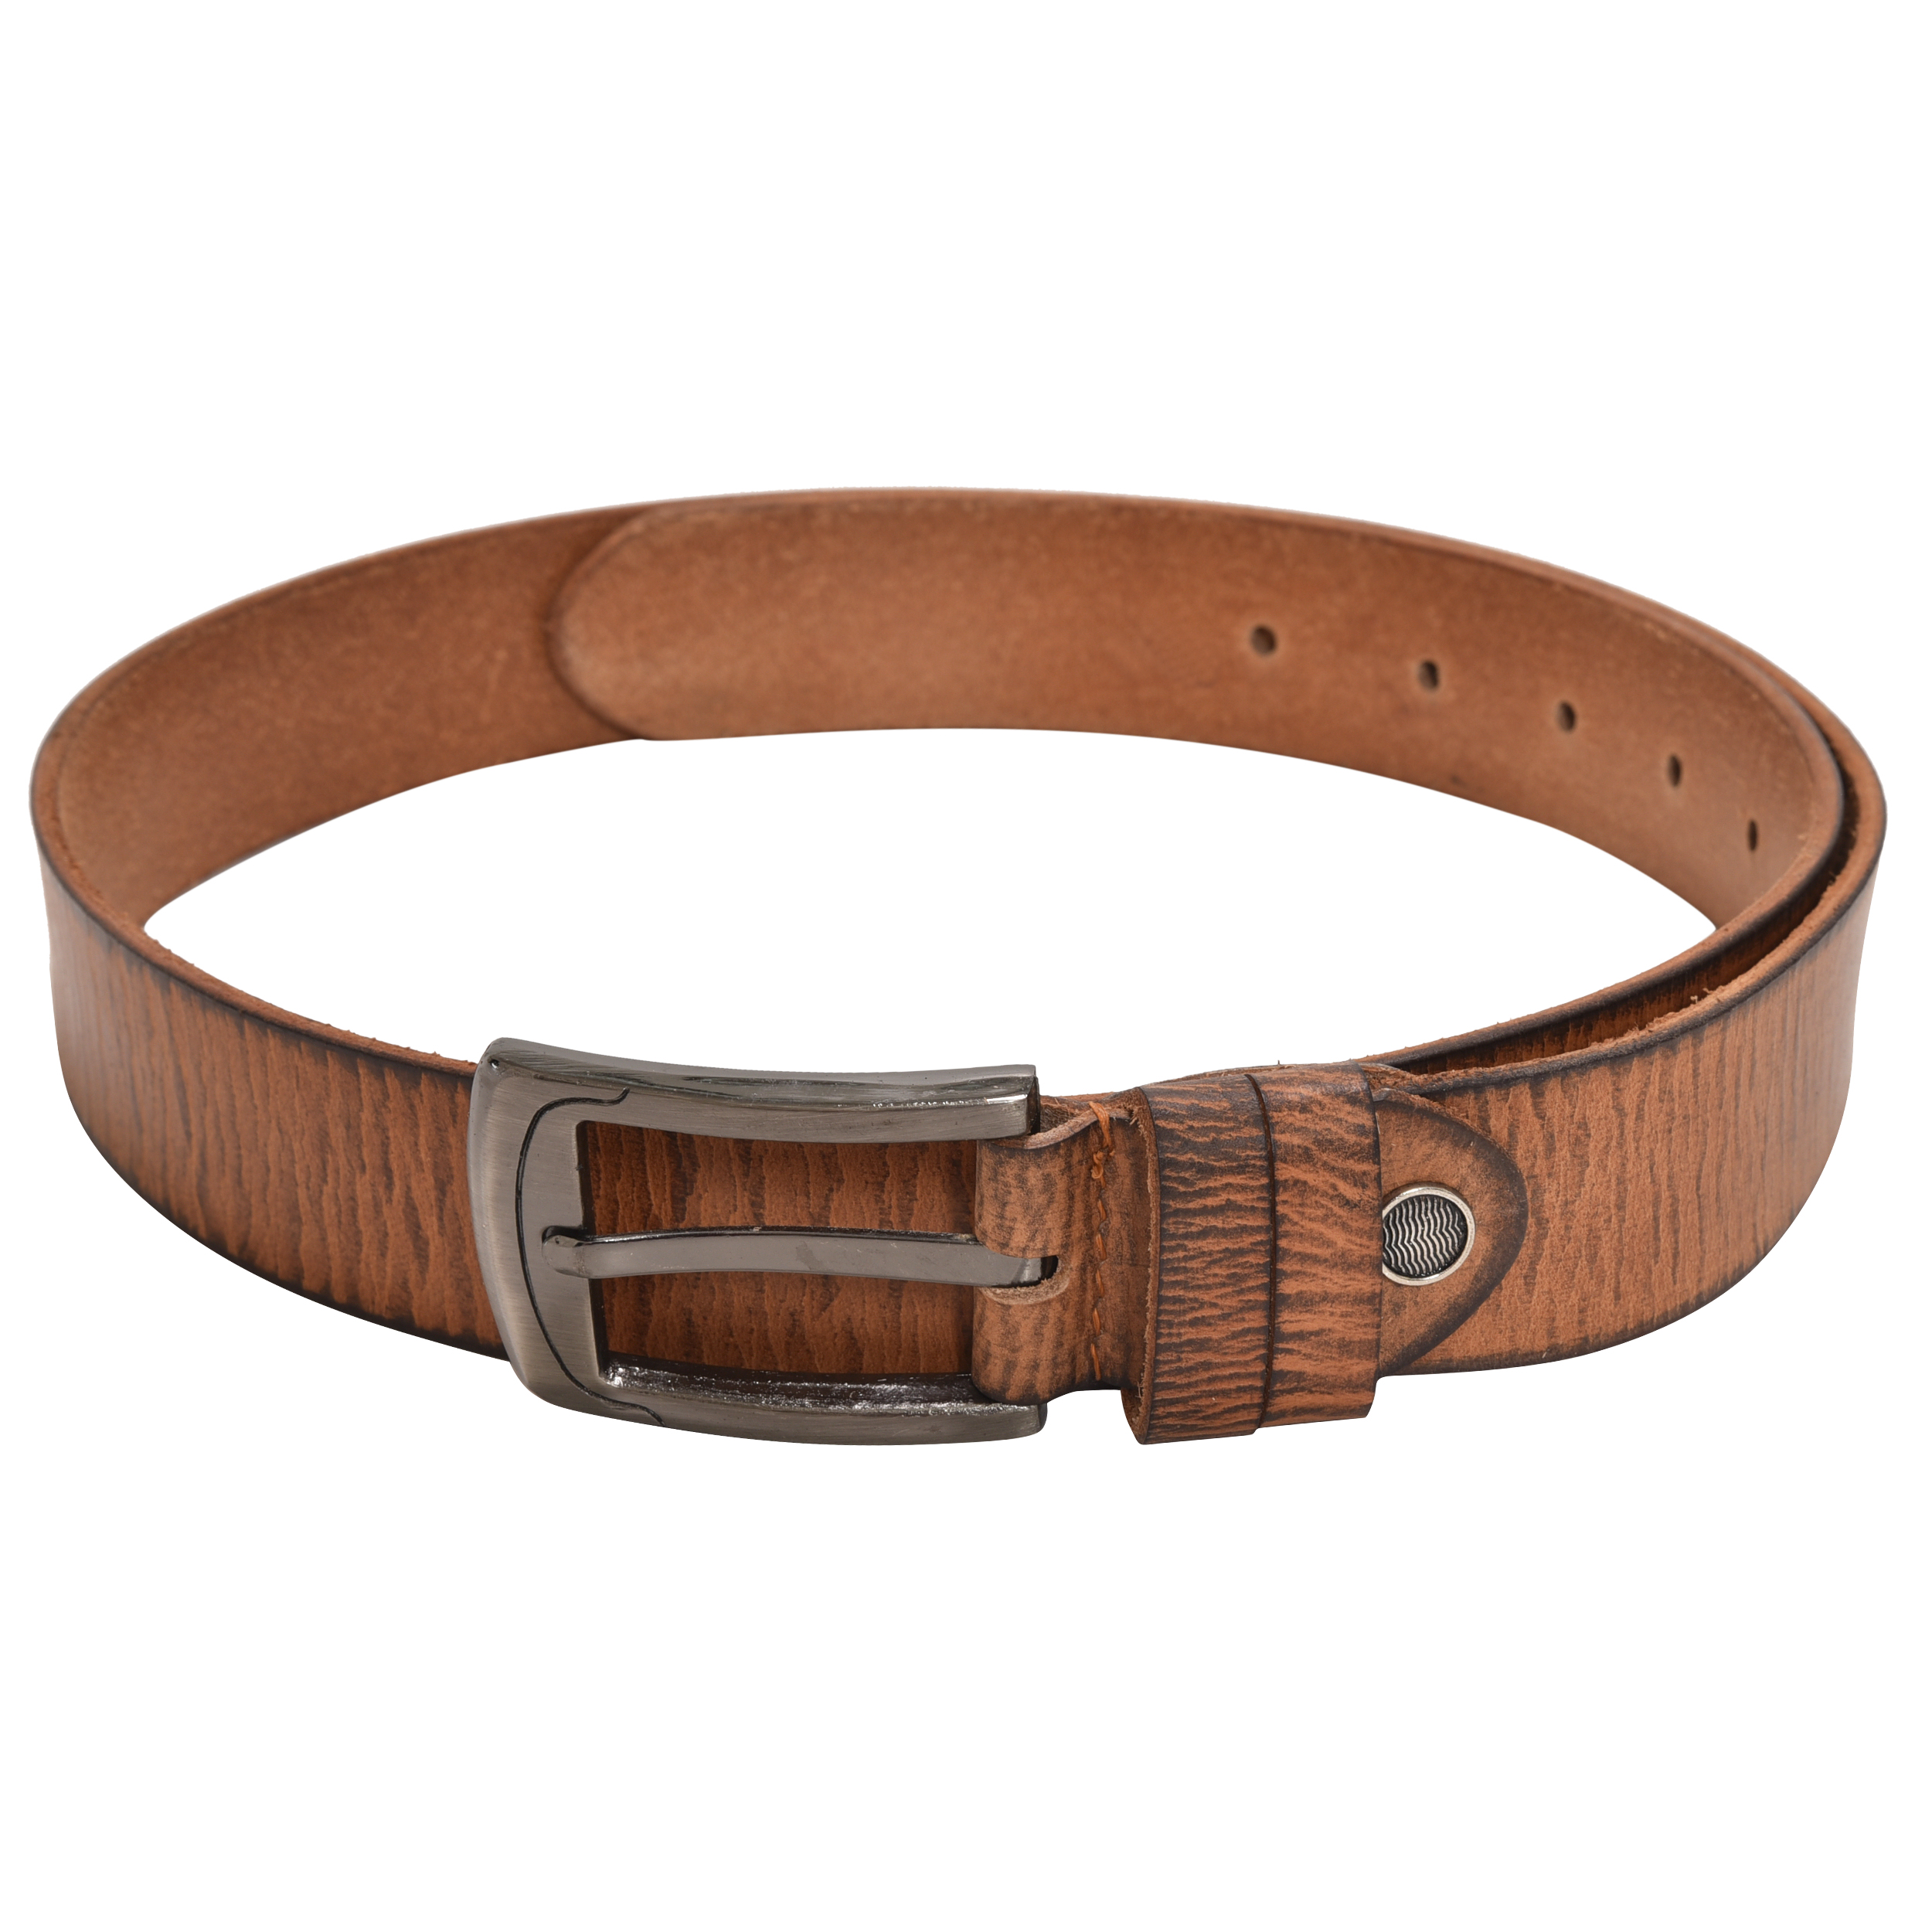 Pure Leather Dualloop Belt Affordable wholesale bulk price discounted rate